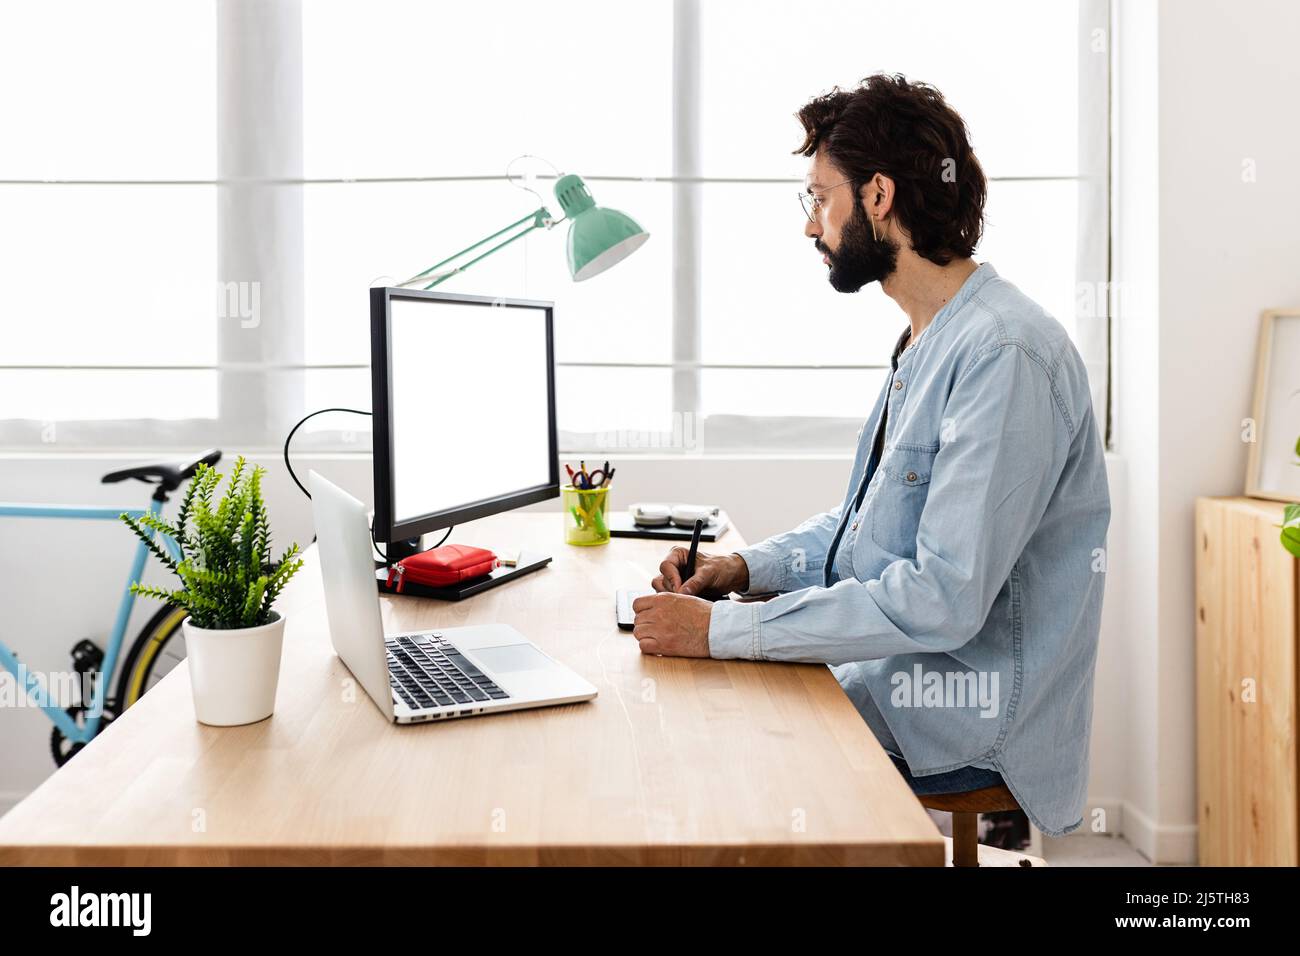 Professional young creative designer using graphic tablet and laptop computer Stock Photo